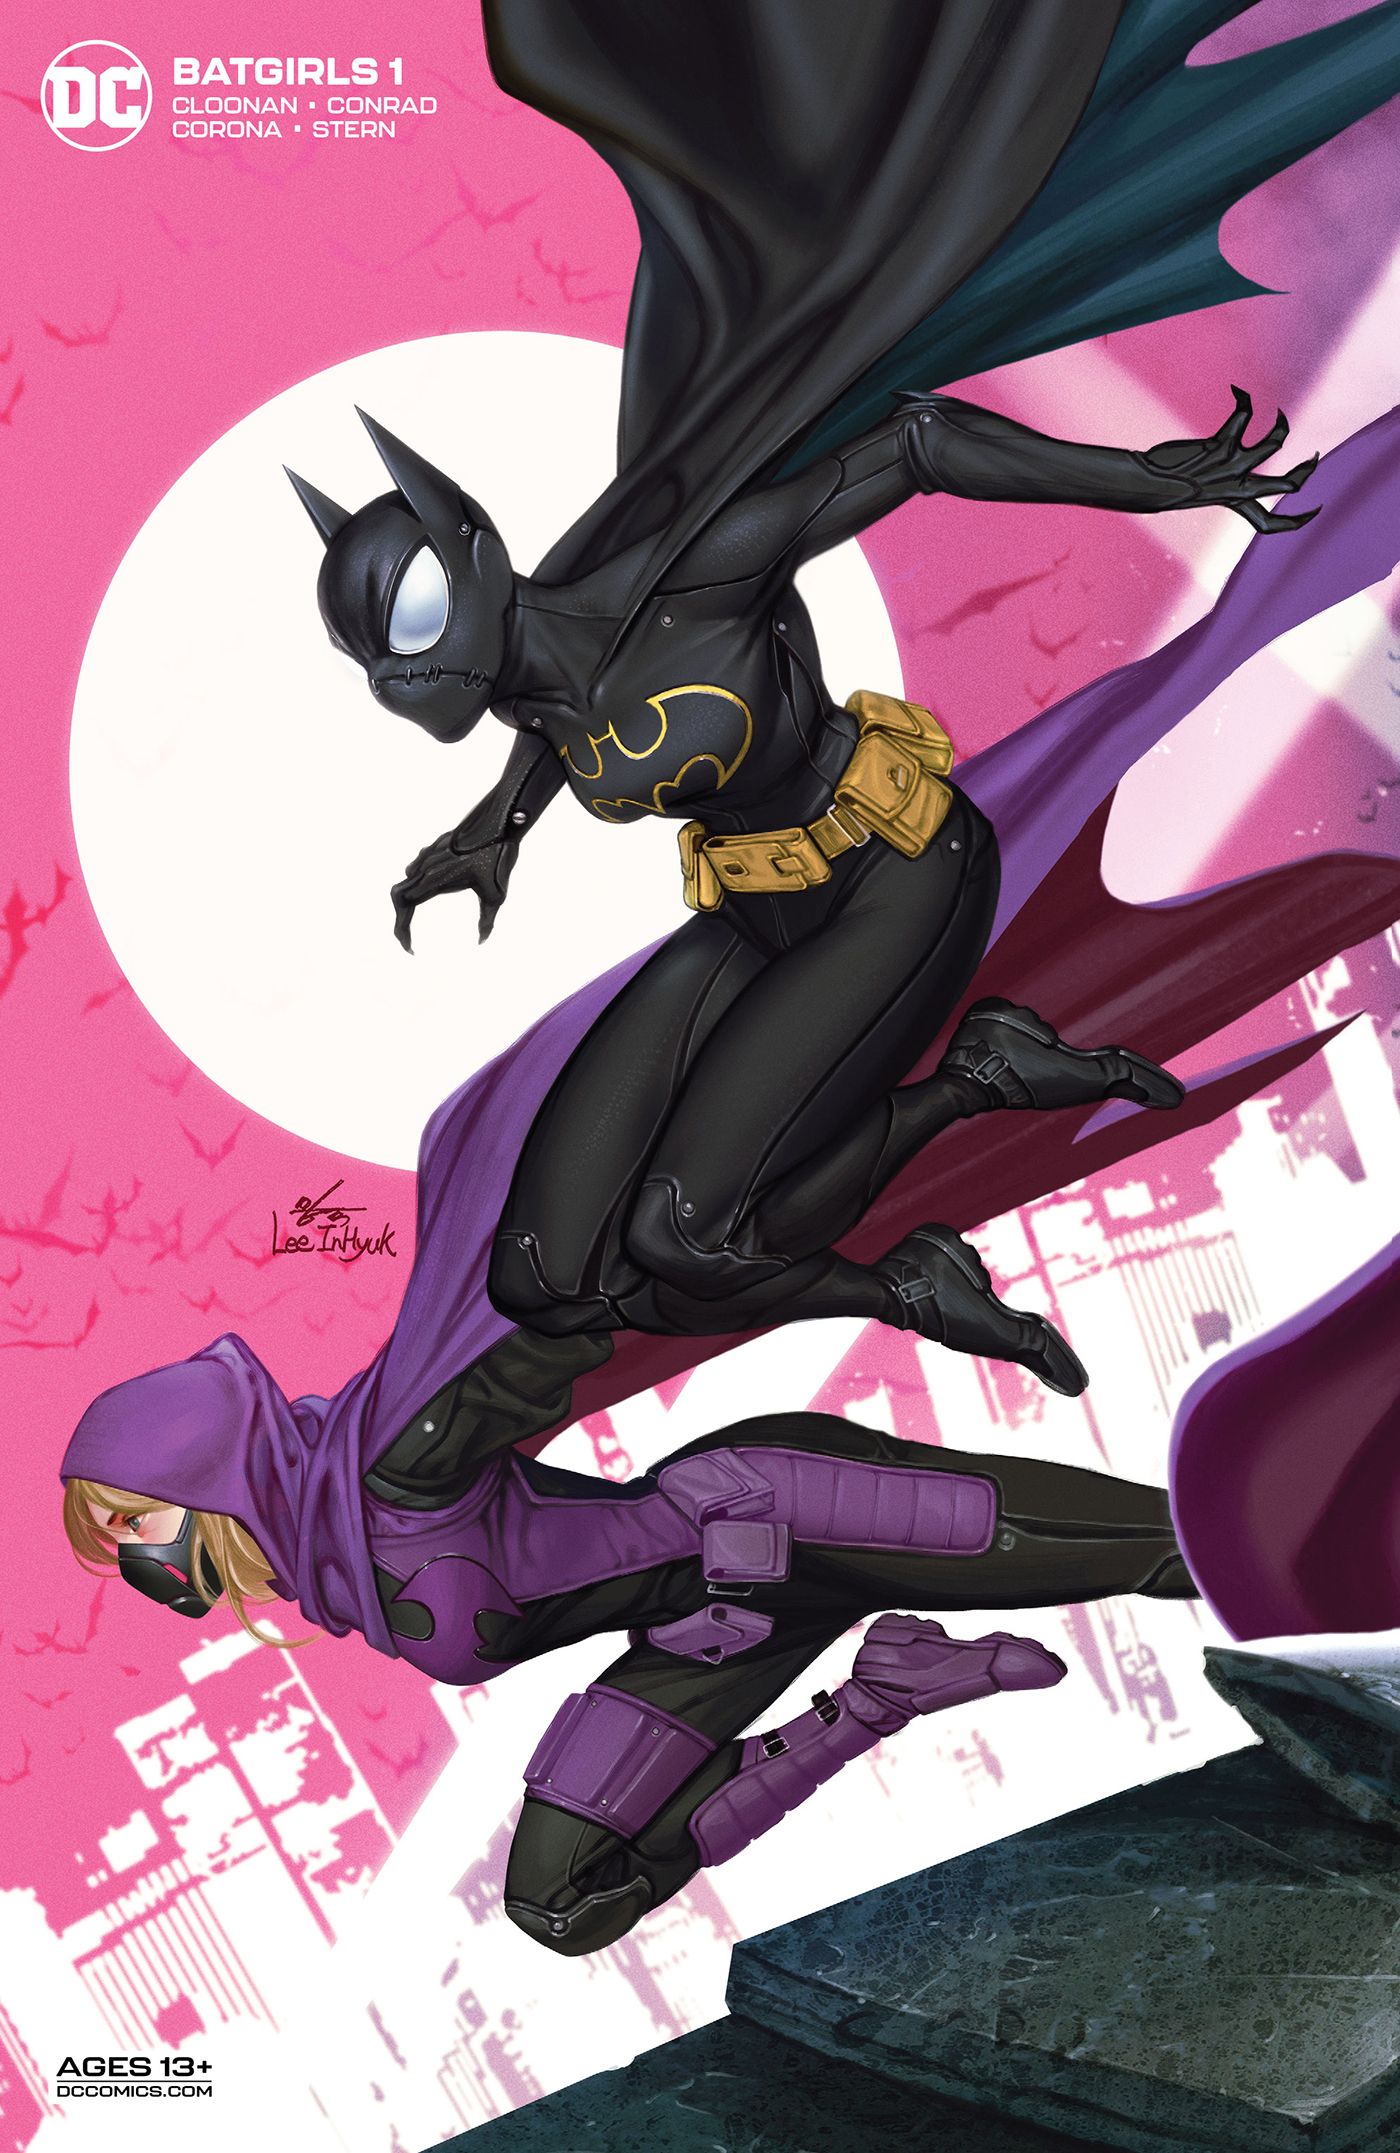 Steph and Cassie leap through the night on a variant cover for Batgirls #1.